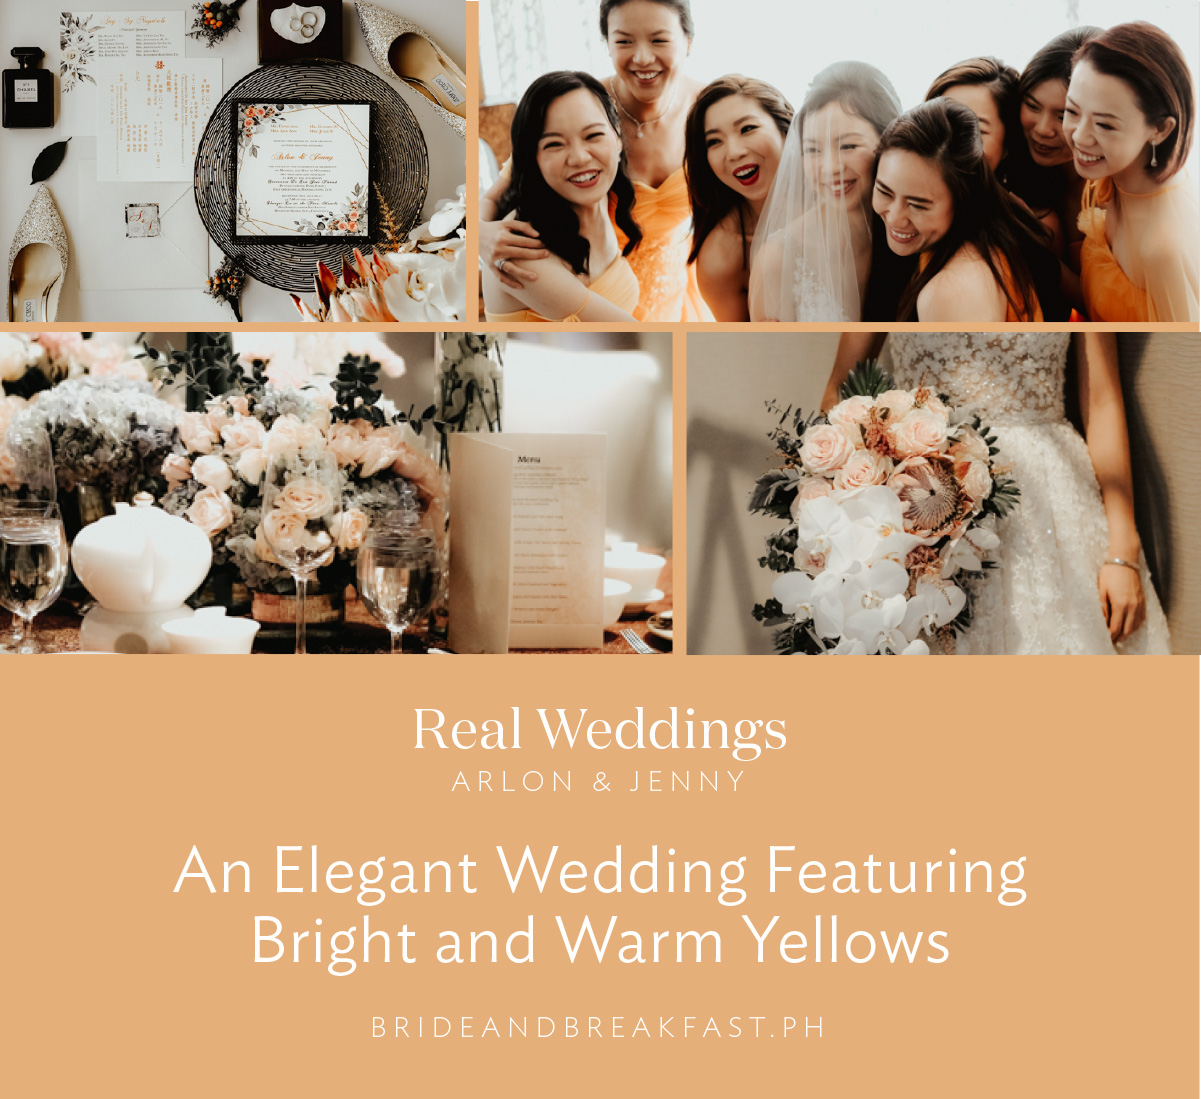 An Elegant Wedding Featuring Bright and Warm Yellows